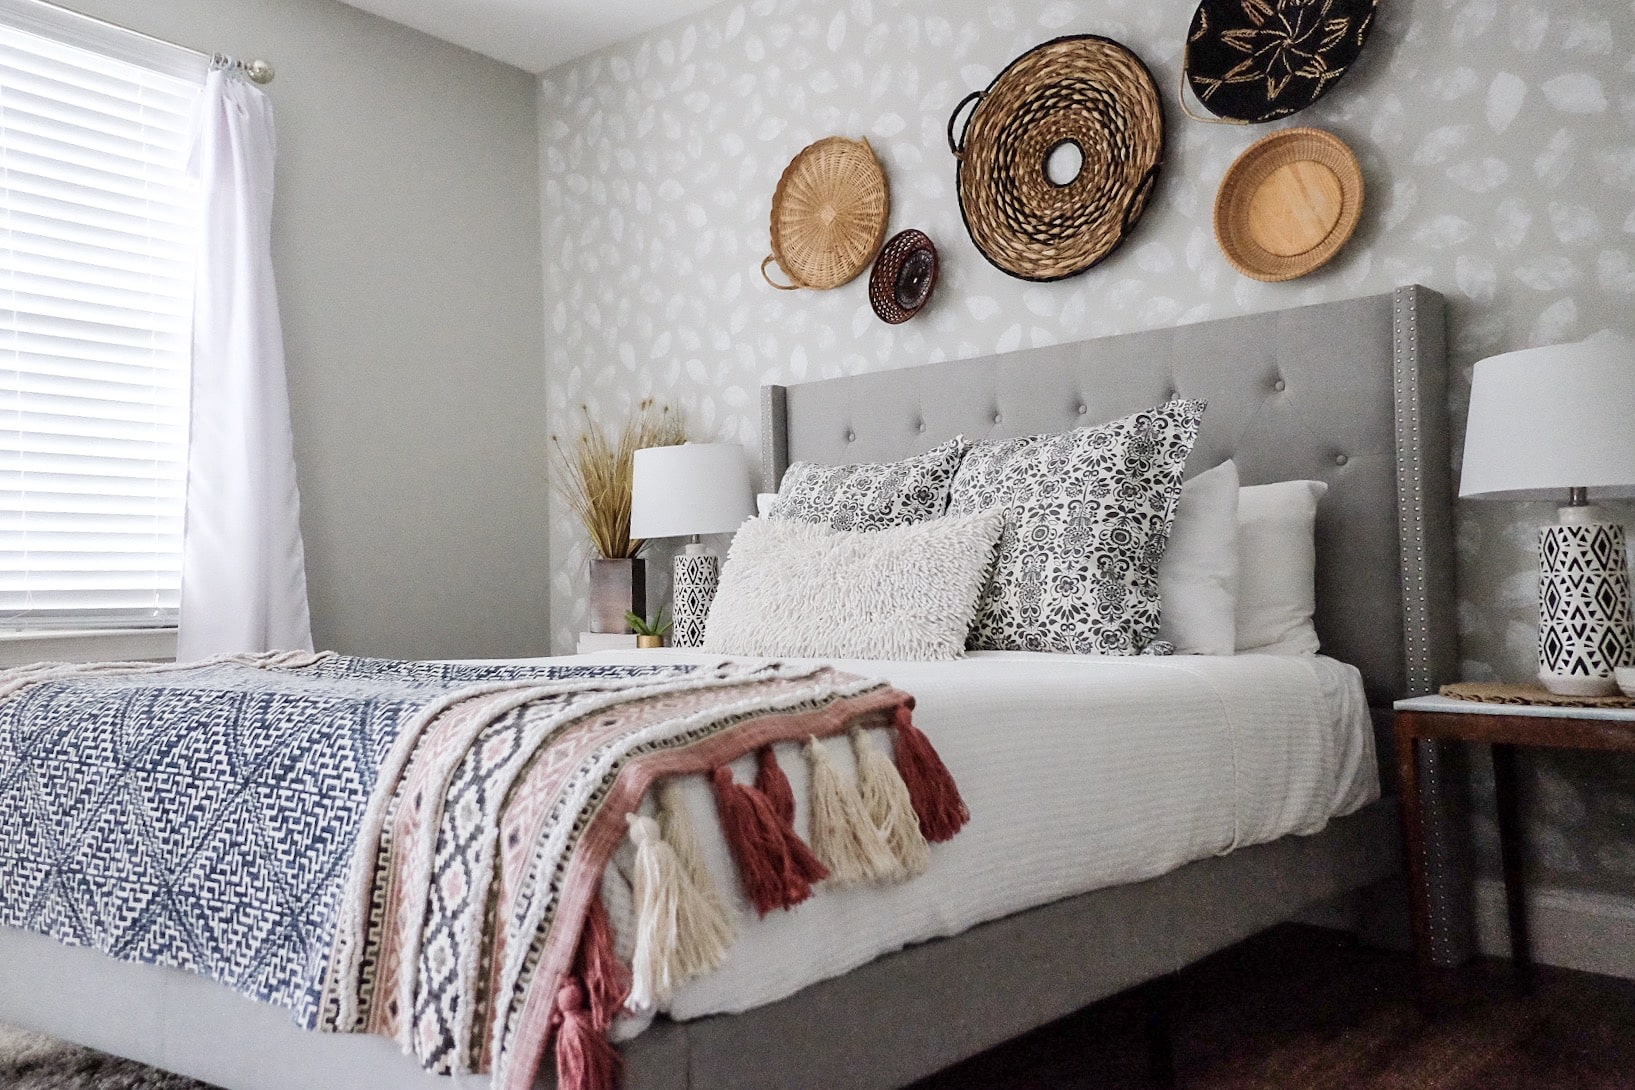 How a Tall Headboard Can Give Your Bedroom Serious Style Points